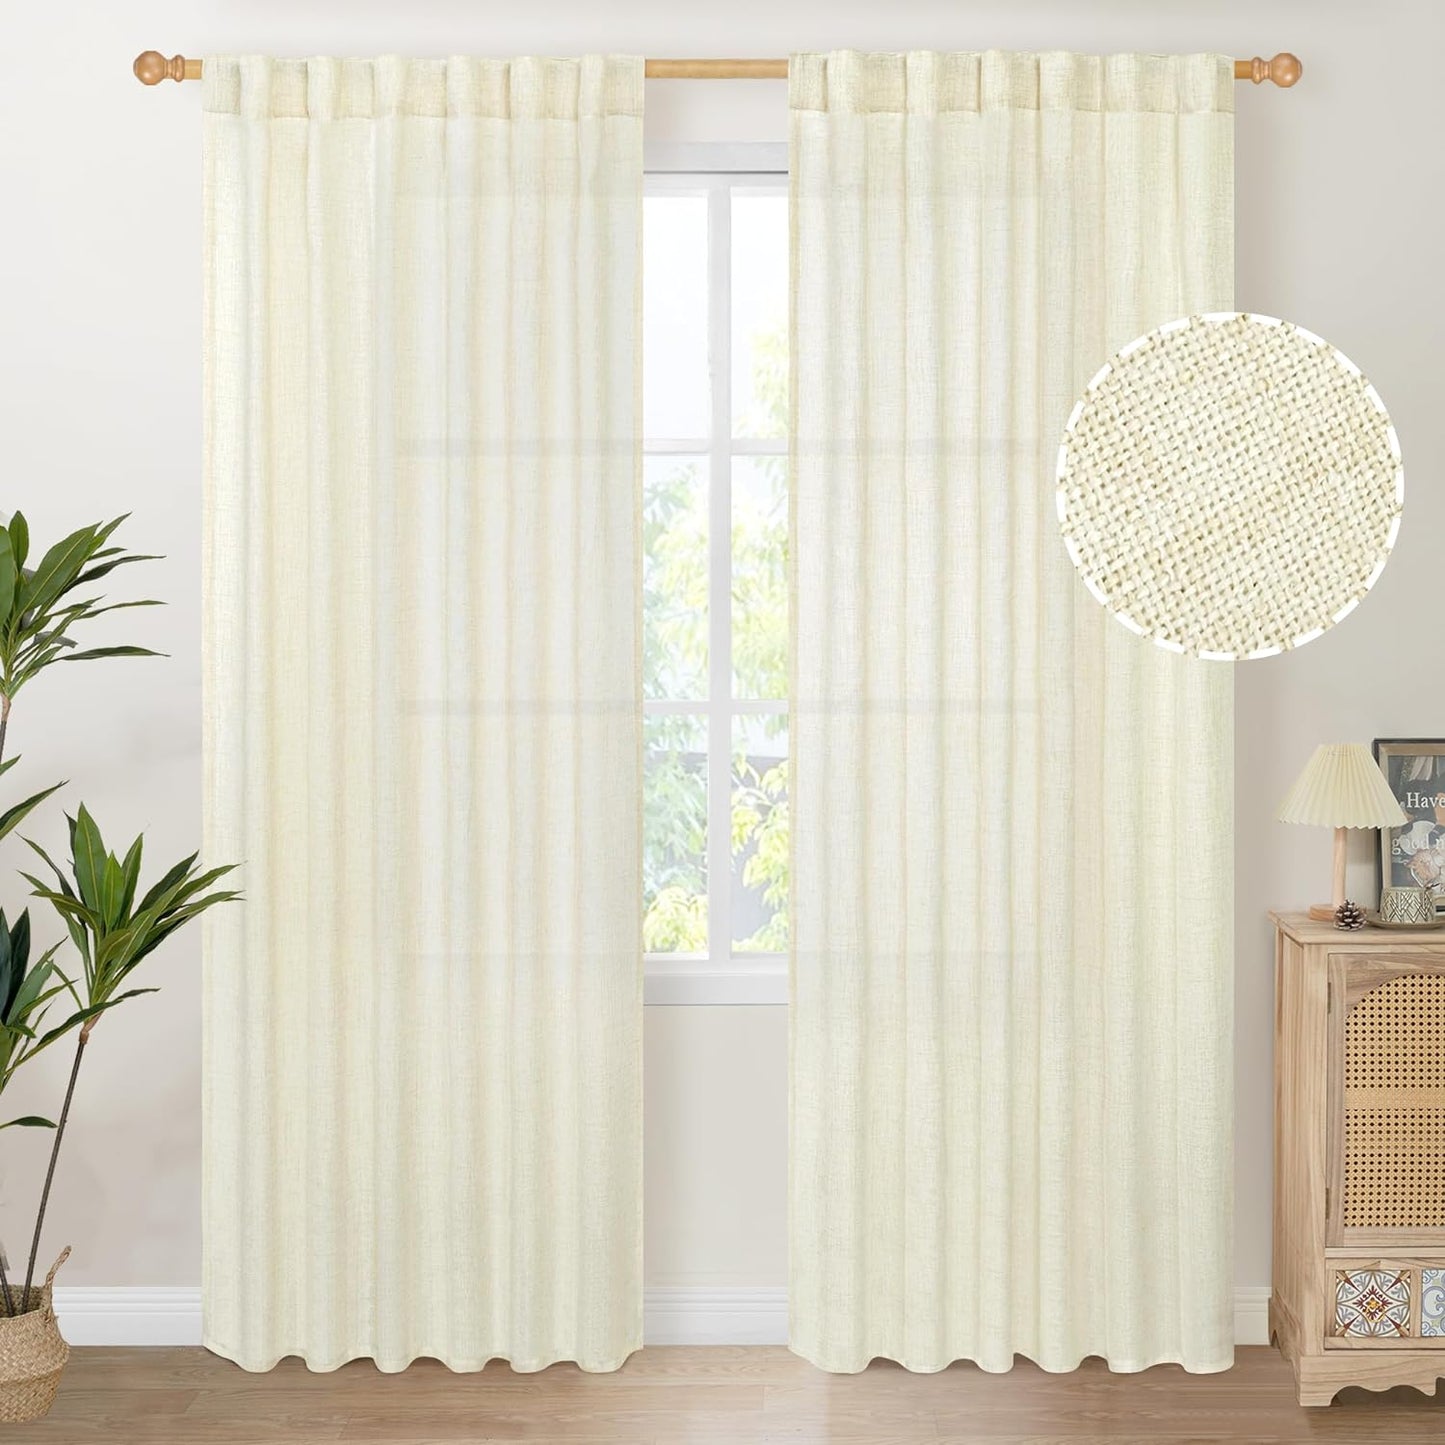 Youngstex Natural Linen Curtains 72 Inch Length 2 Panels for Living Room Light Filtering Textured Window Drapes for Bedroom Dining Office Back Tab Rod Pocket, 52 X 72 Inch  YoungsTex Cream 52W X 84L 